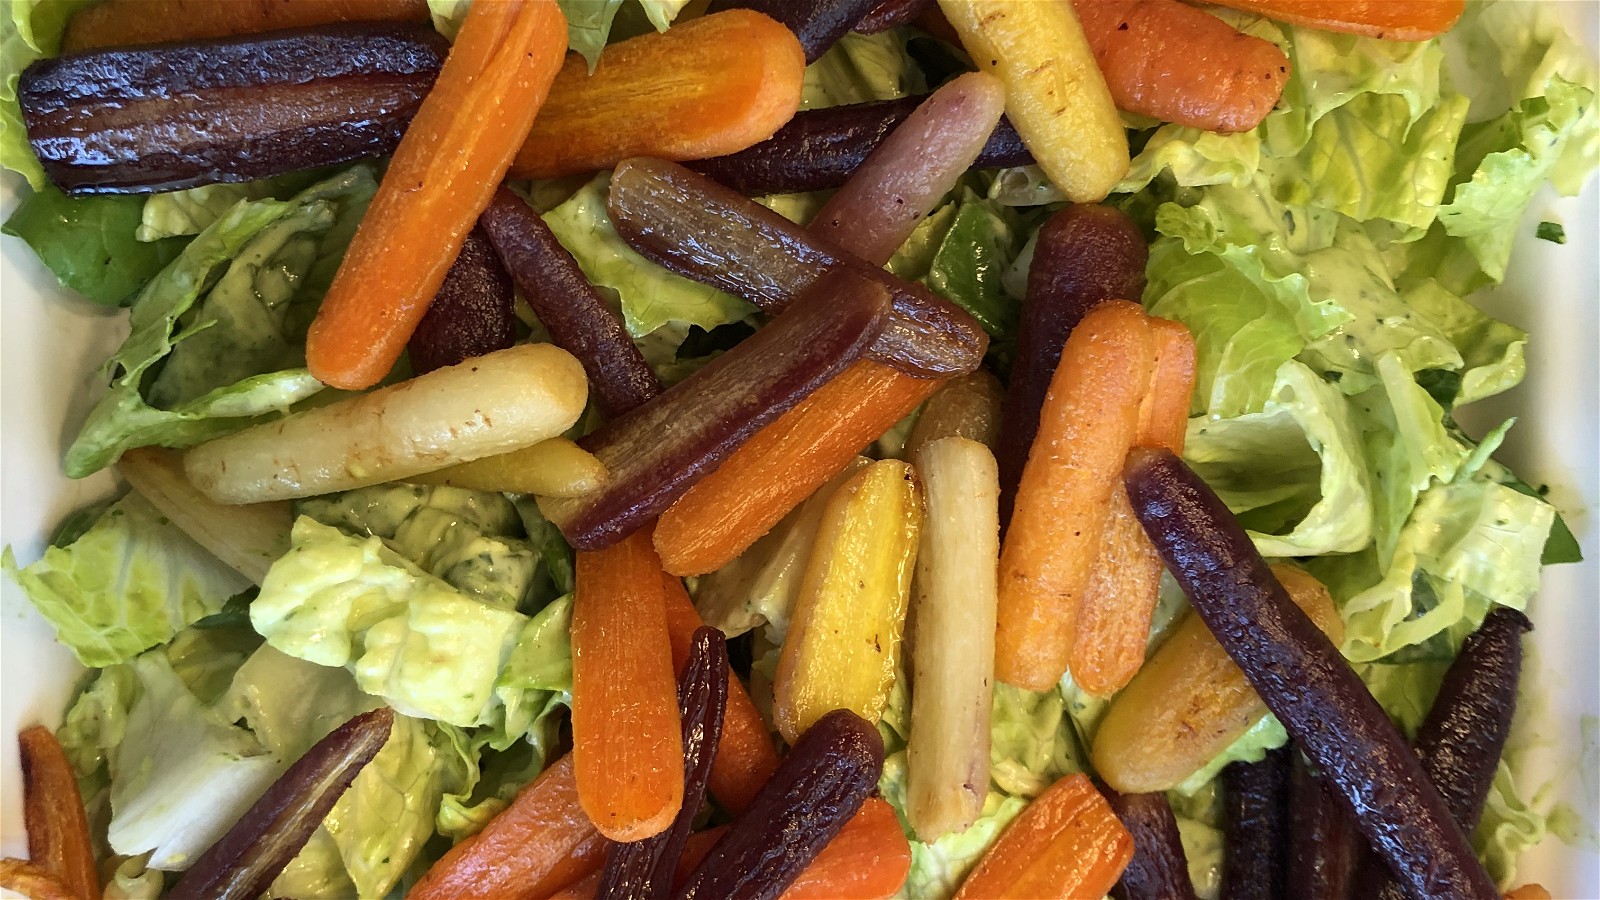 Image of Roasted Carrot Salad